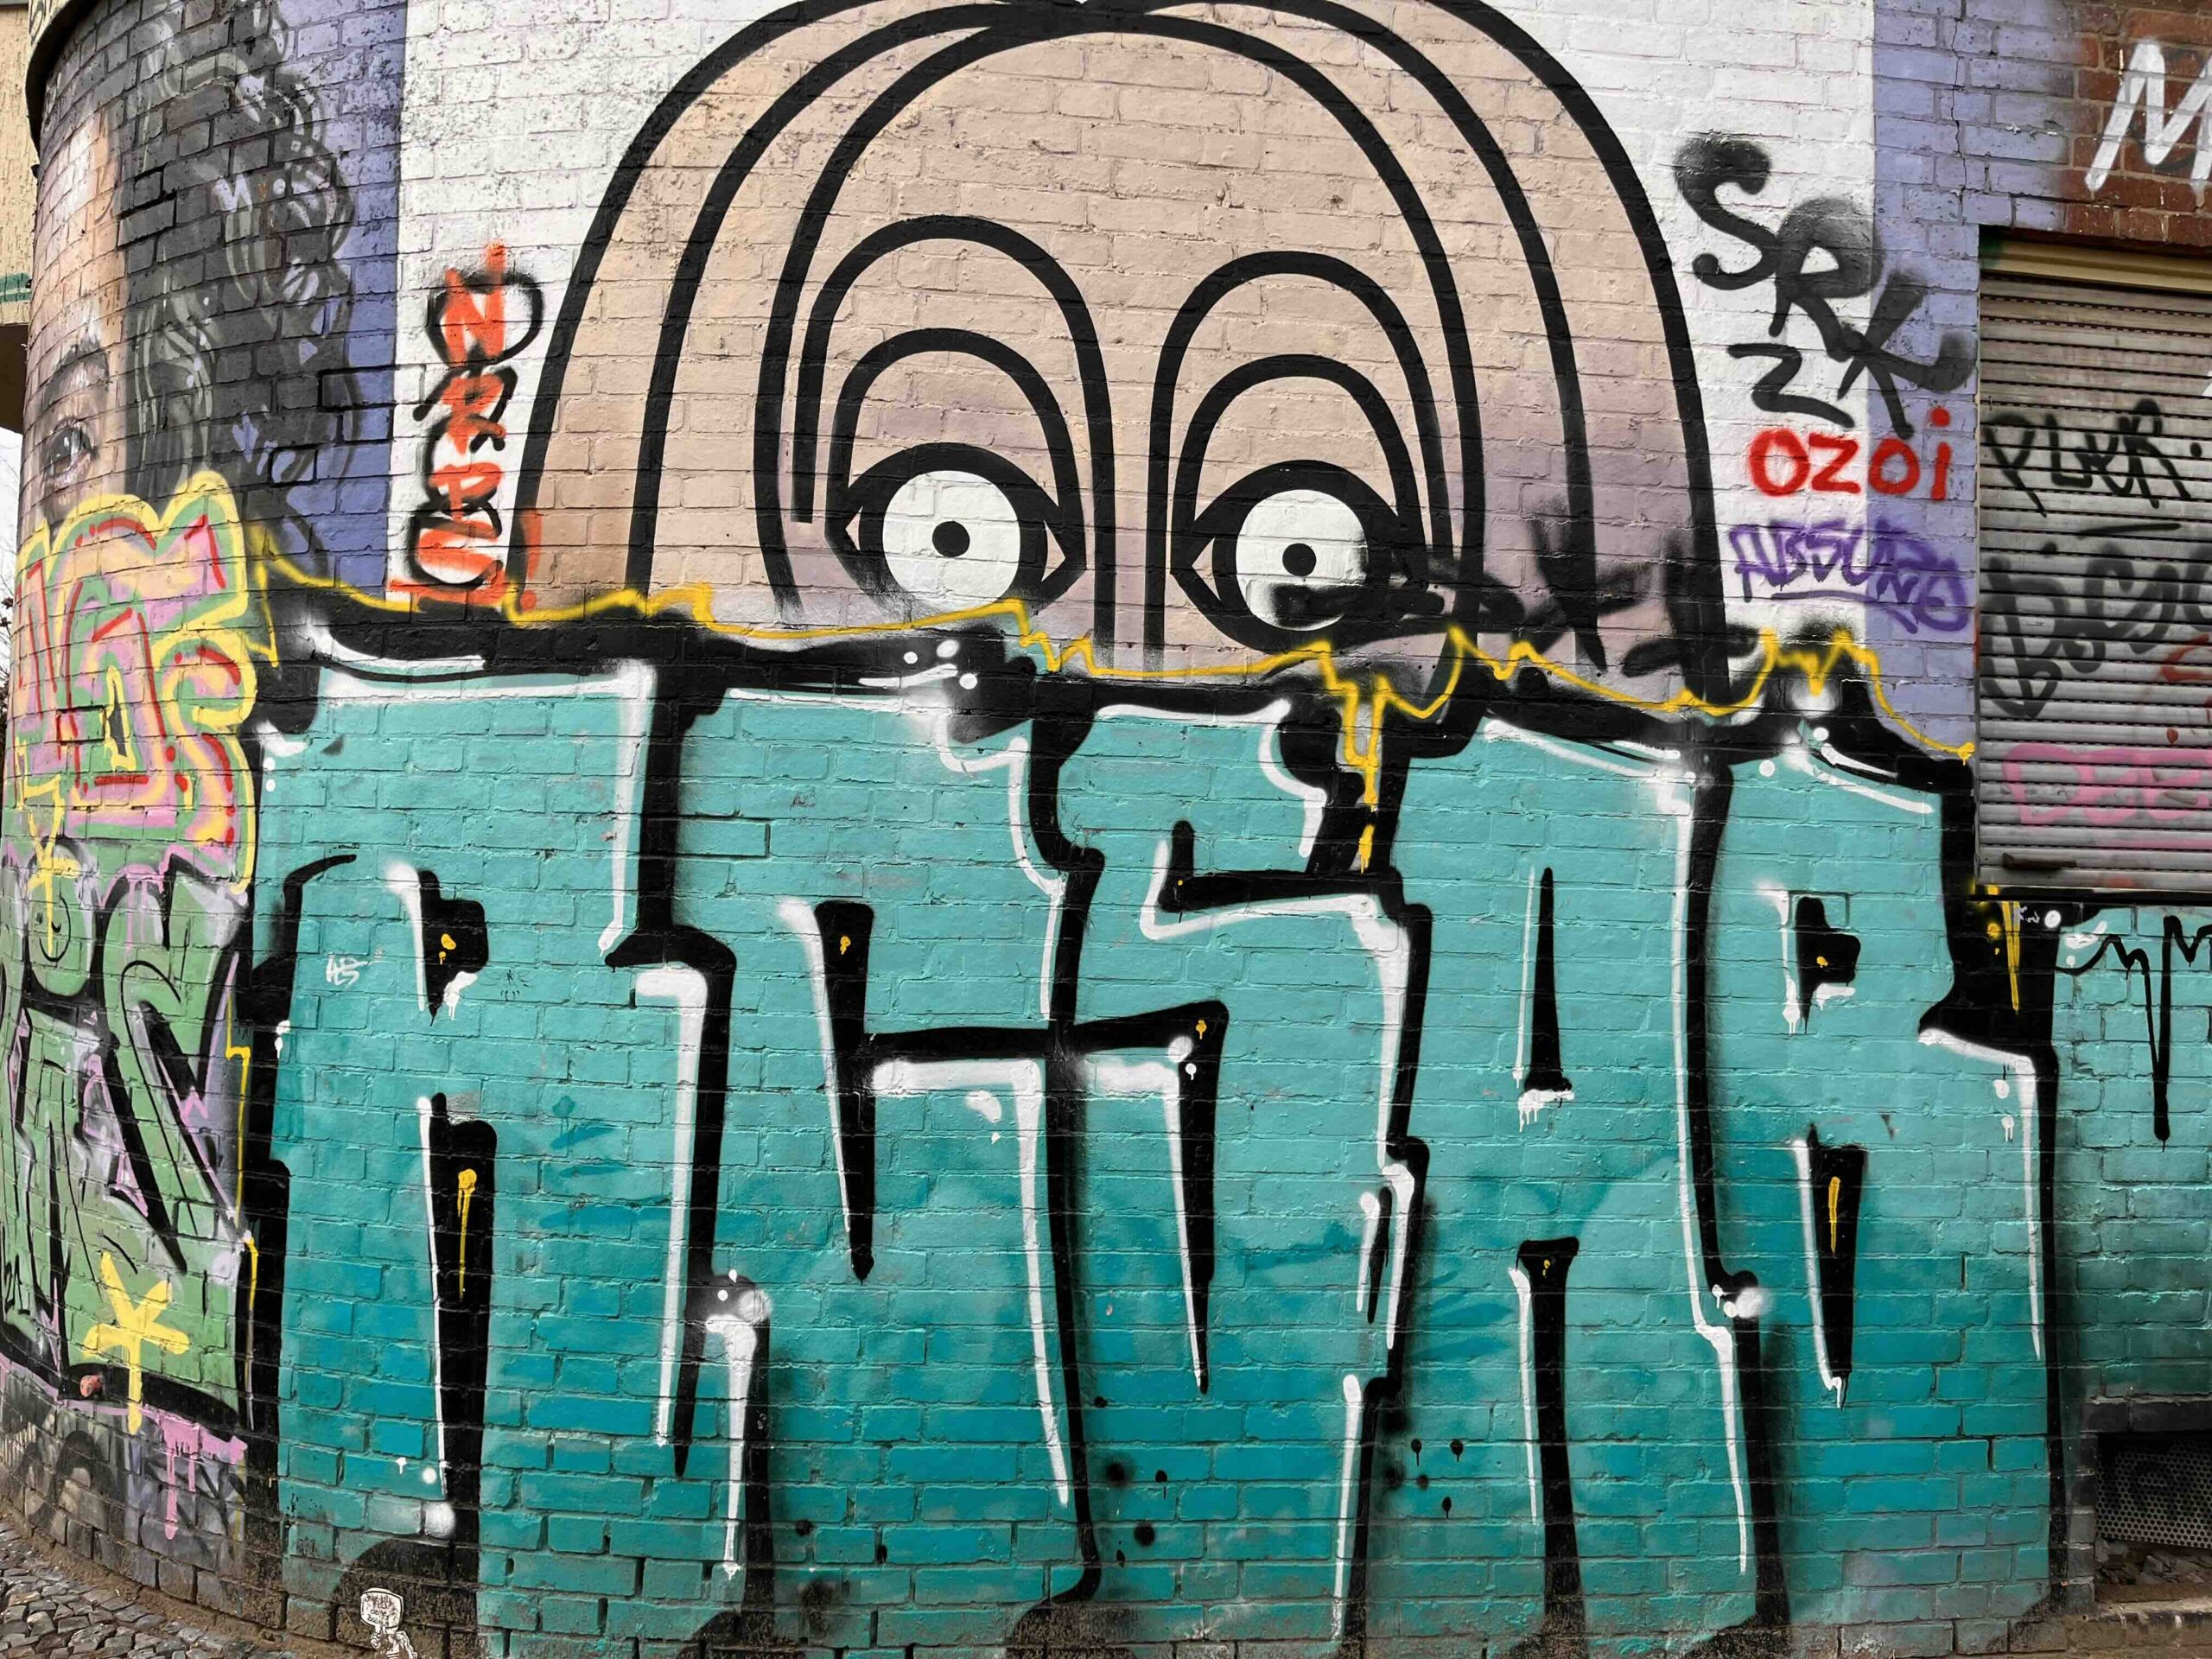 Graffiti of a mint green tag that says ACSAR and the image of a face peeking over it